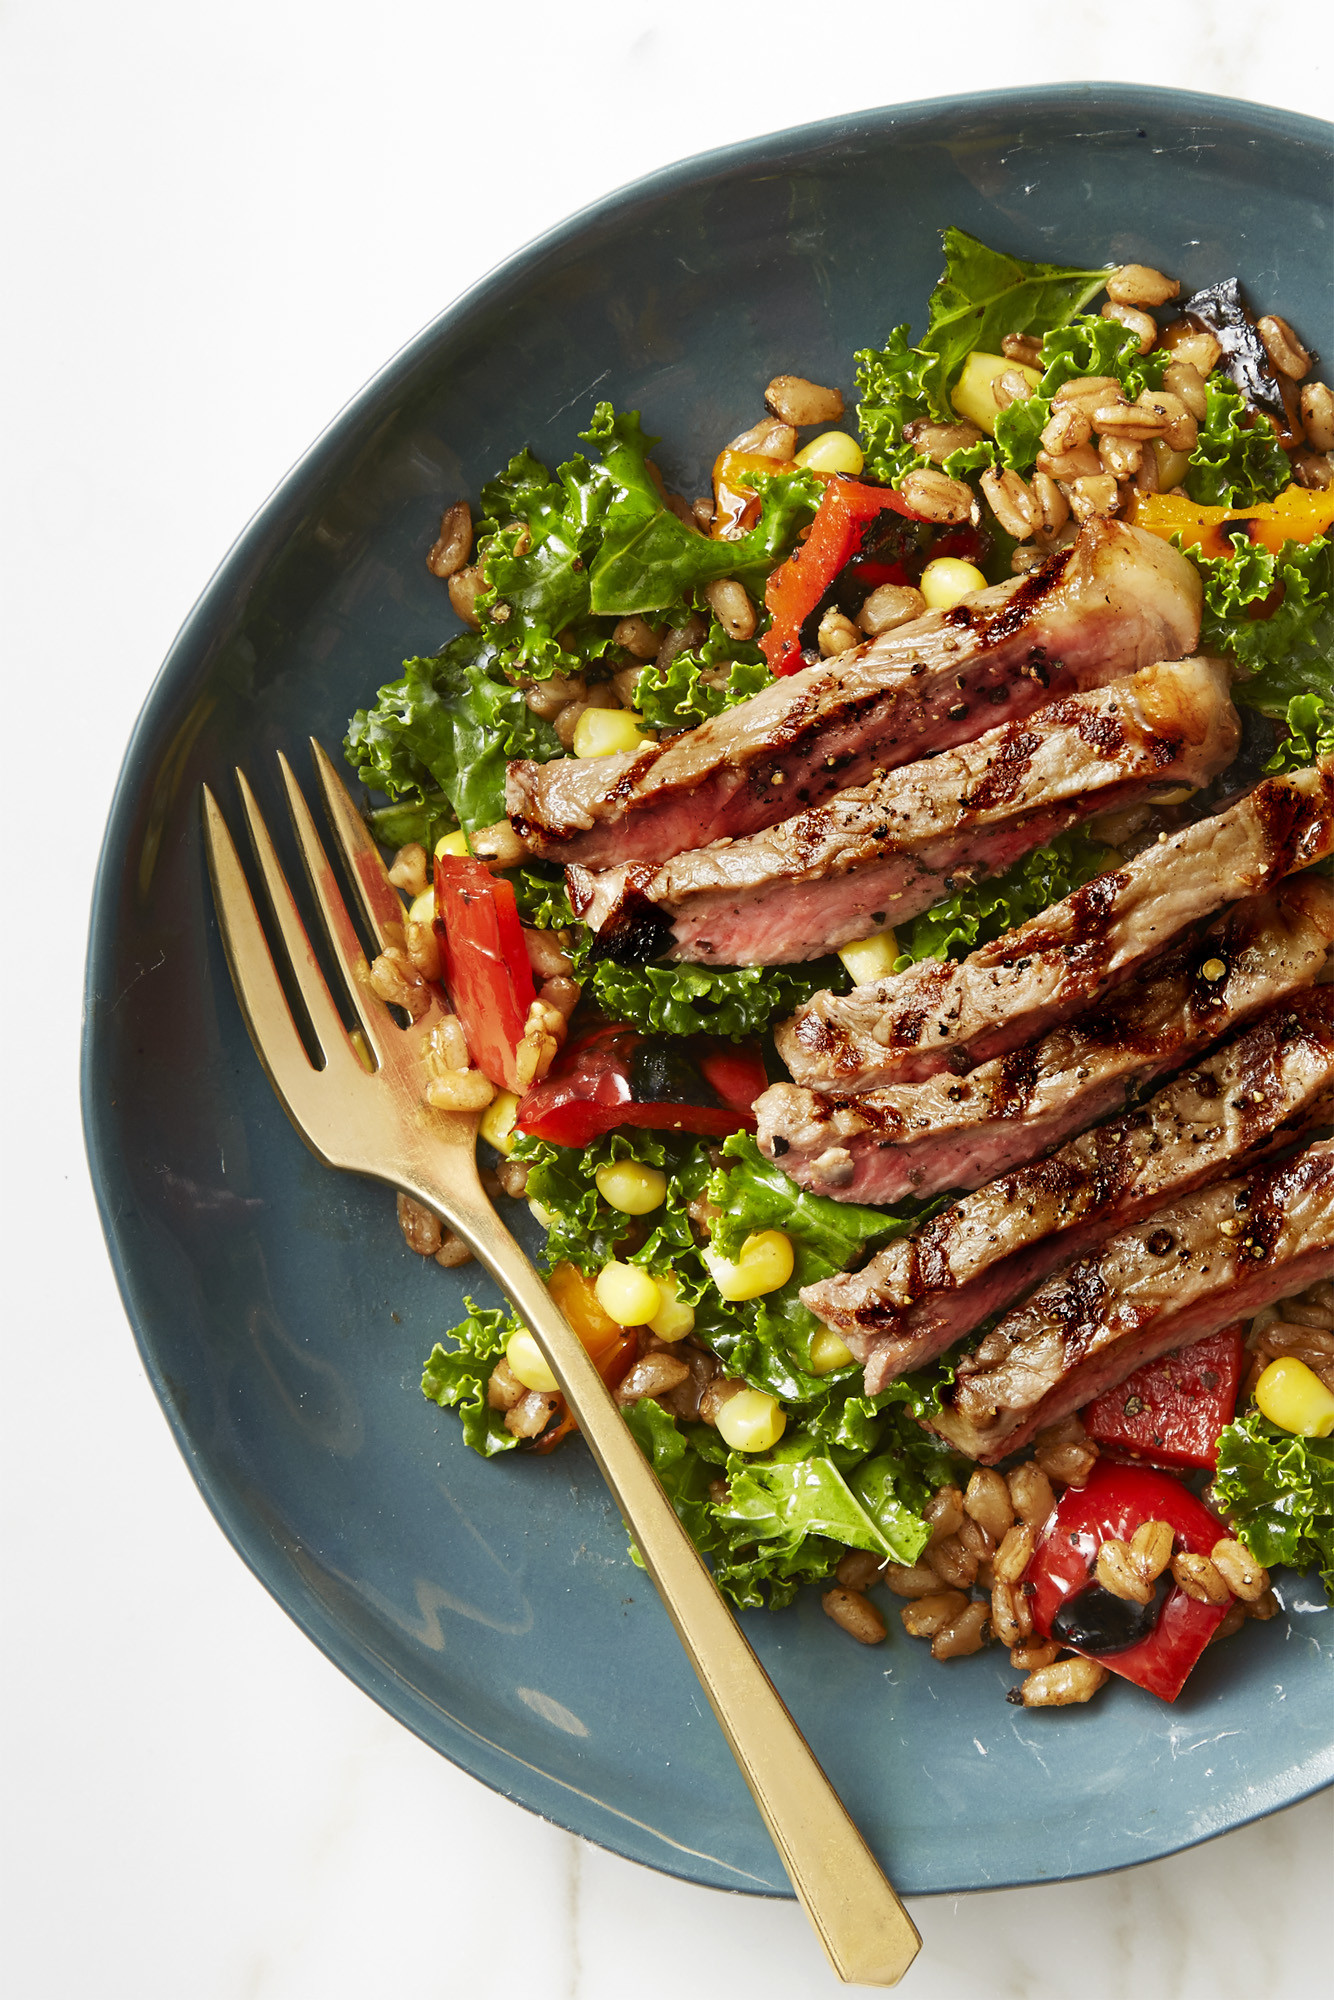 Good Summer Dinners
 Best Summer Farro Salad with Grilled Steak Recipe How to